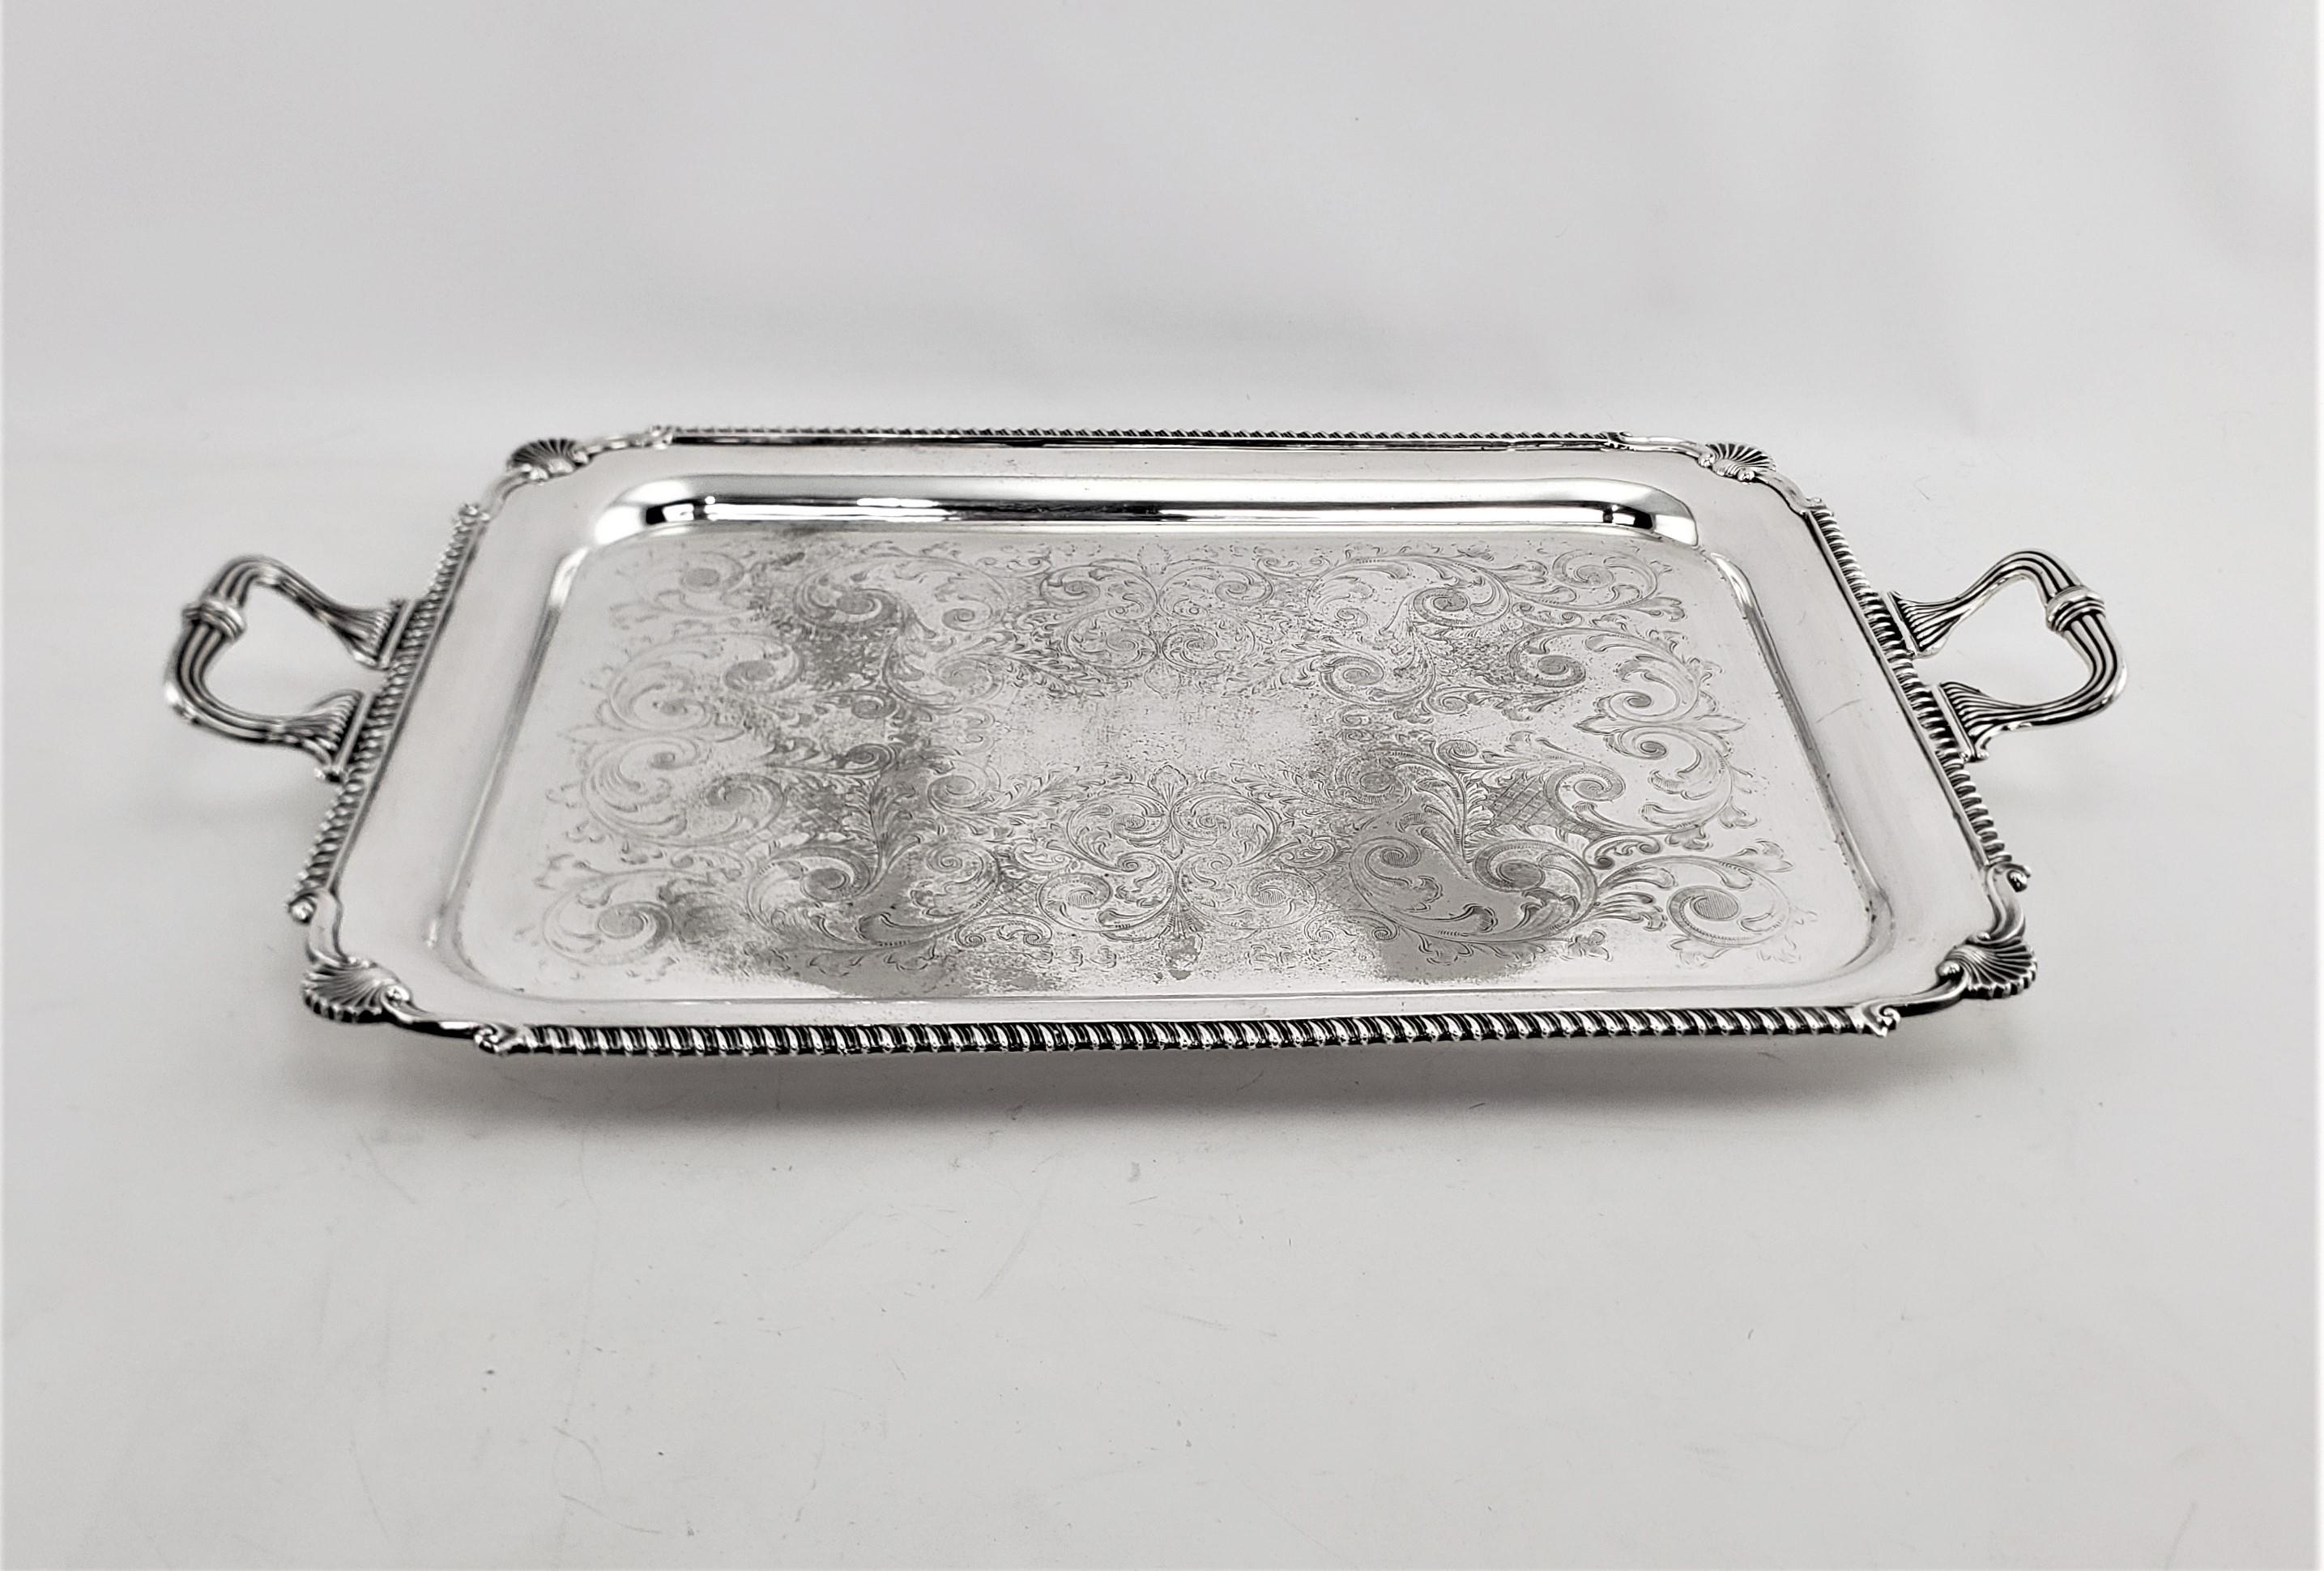 Large Antique English Edwardian Styled Rectangular Silver Plated Serving Tray 1